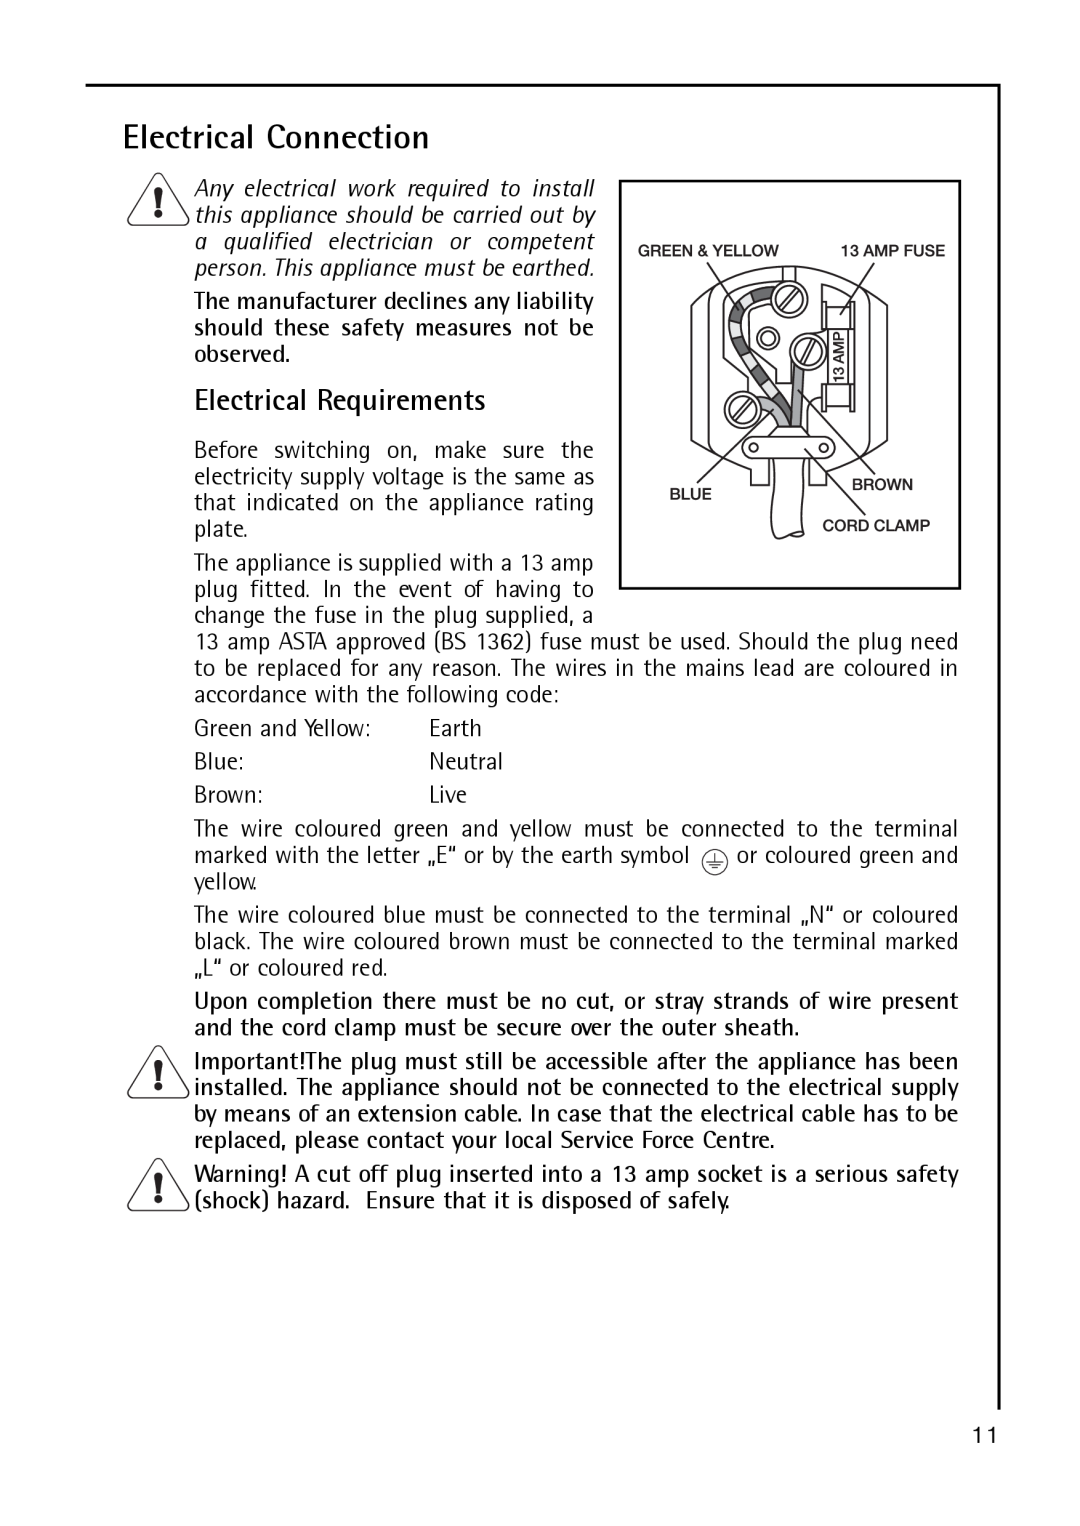 Electrolux S 70178 TK38 manual Electrical Connection, Electrical Requirements 